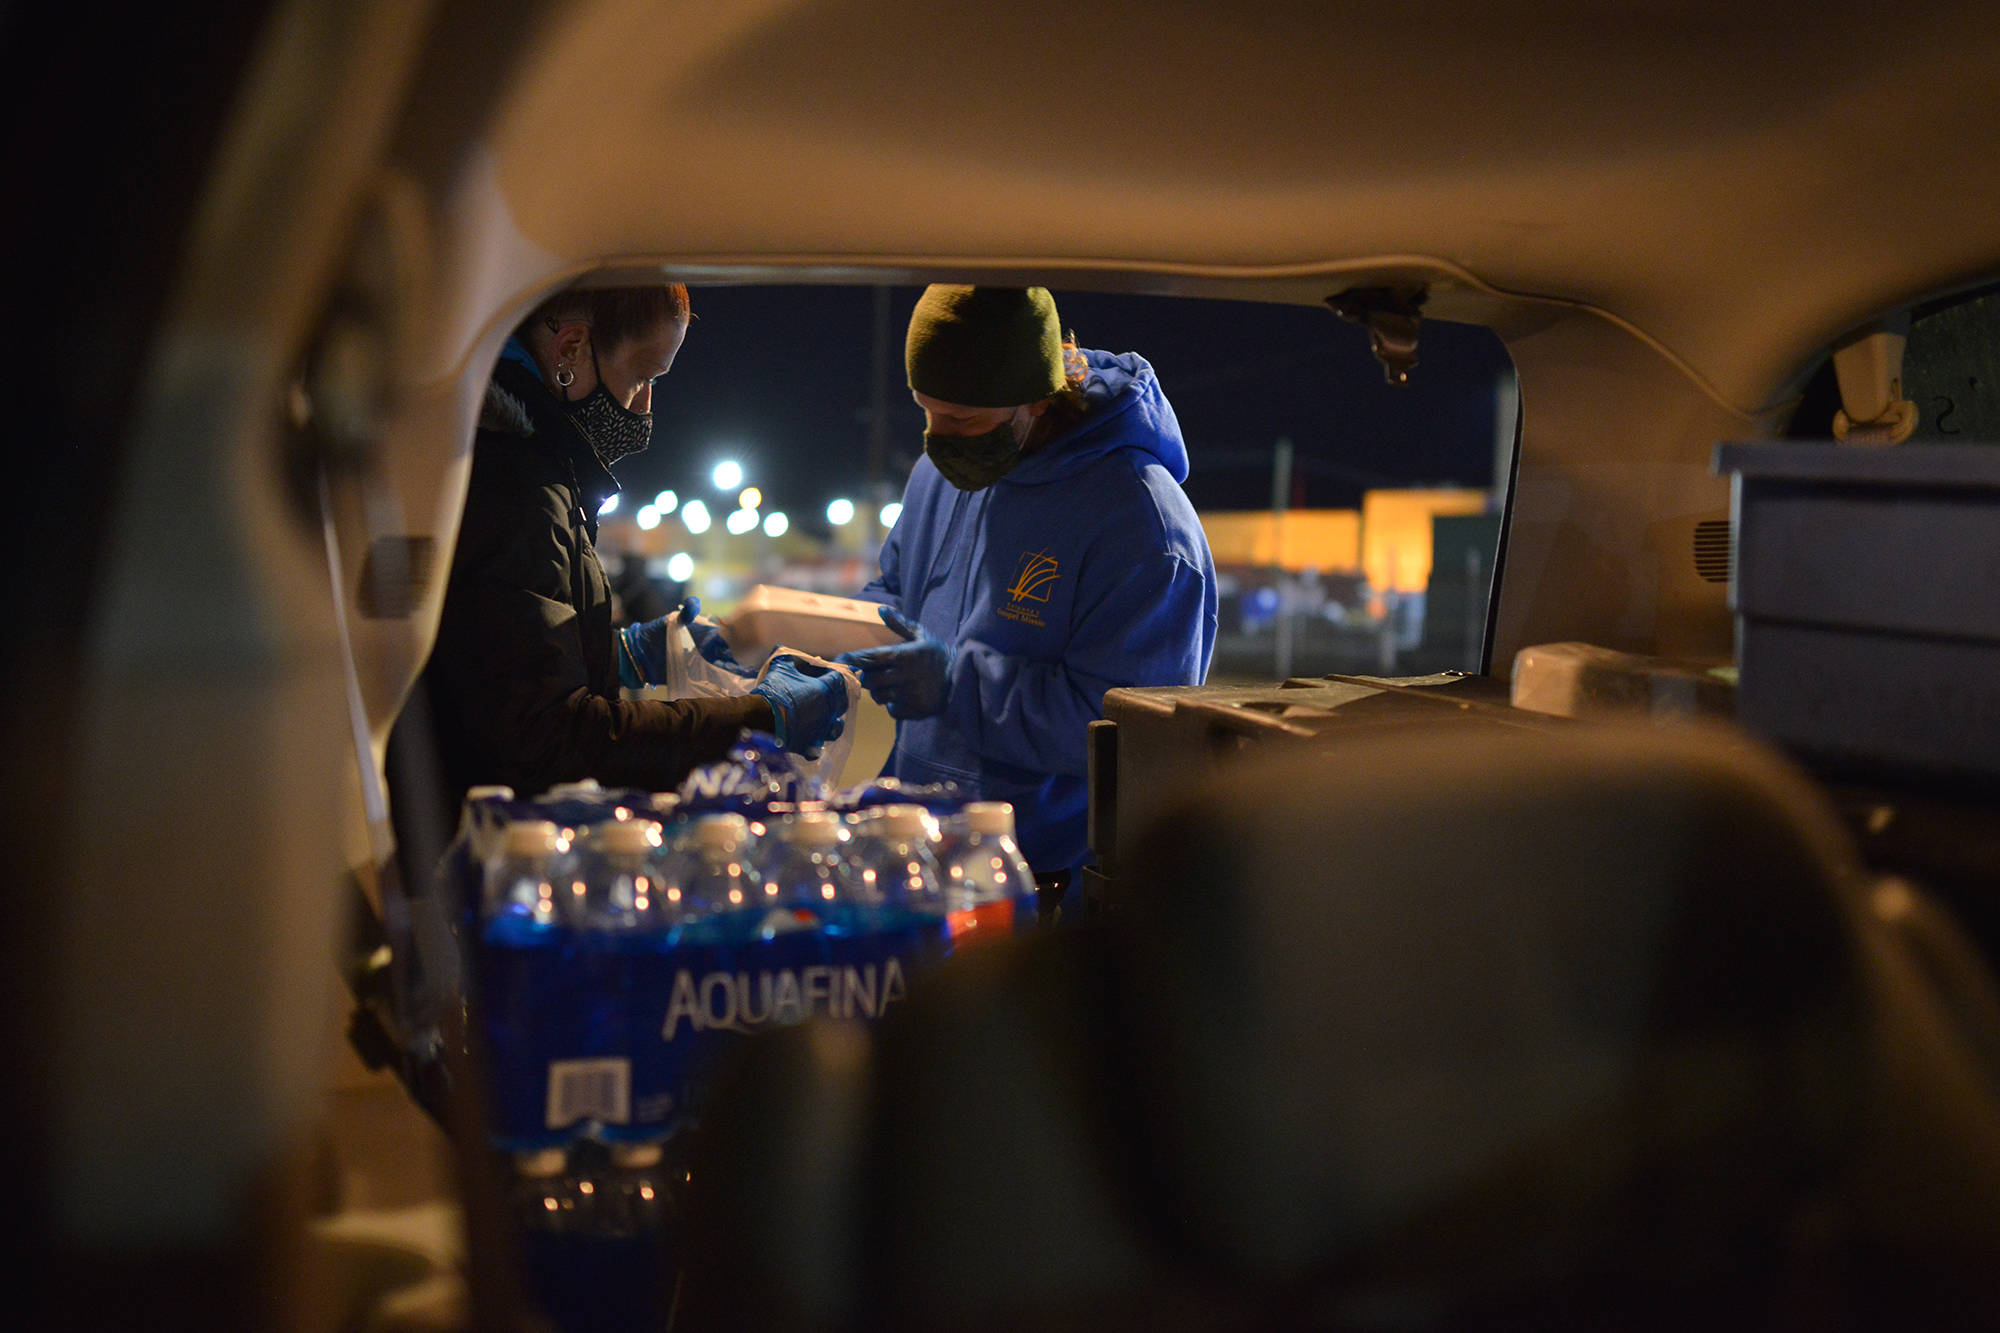 Gospel Mission volunteers hand out meals on Baillie Avenue in Kelowna, Saturday night (Dec. 19). (Phil McLachlan - Capital News)